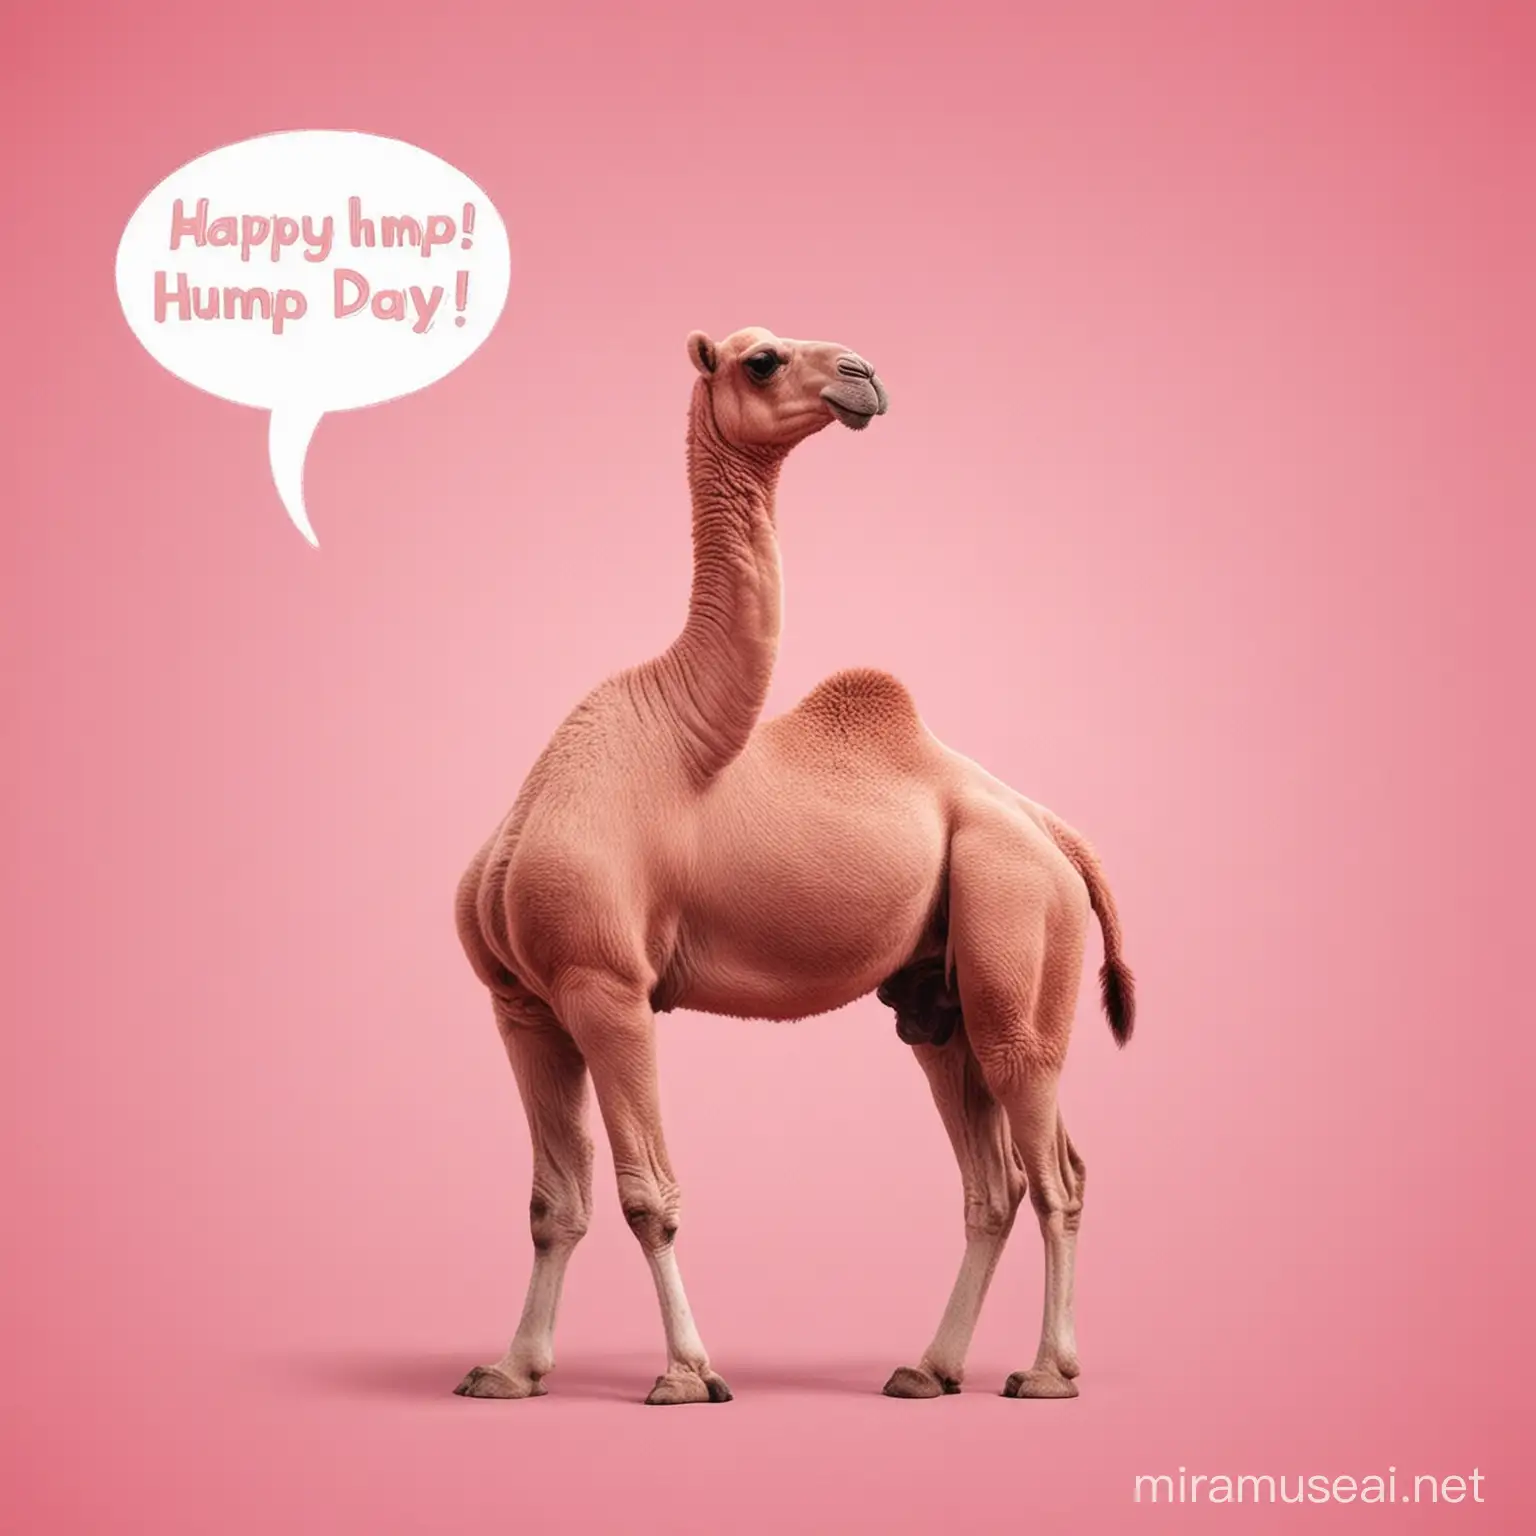 A pink camel with a text bubble having it say "Happy Hump Day!"